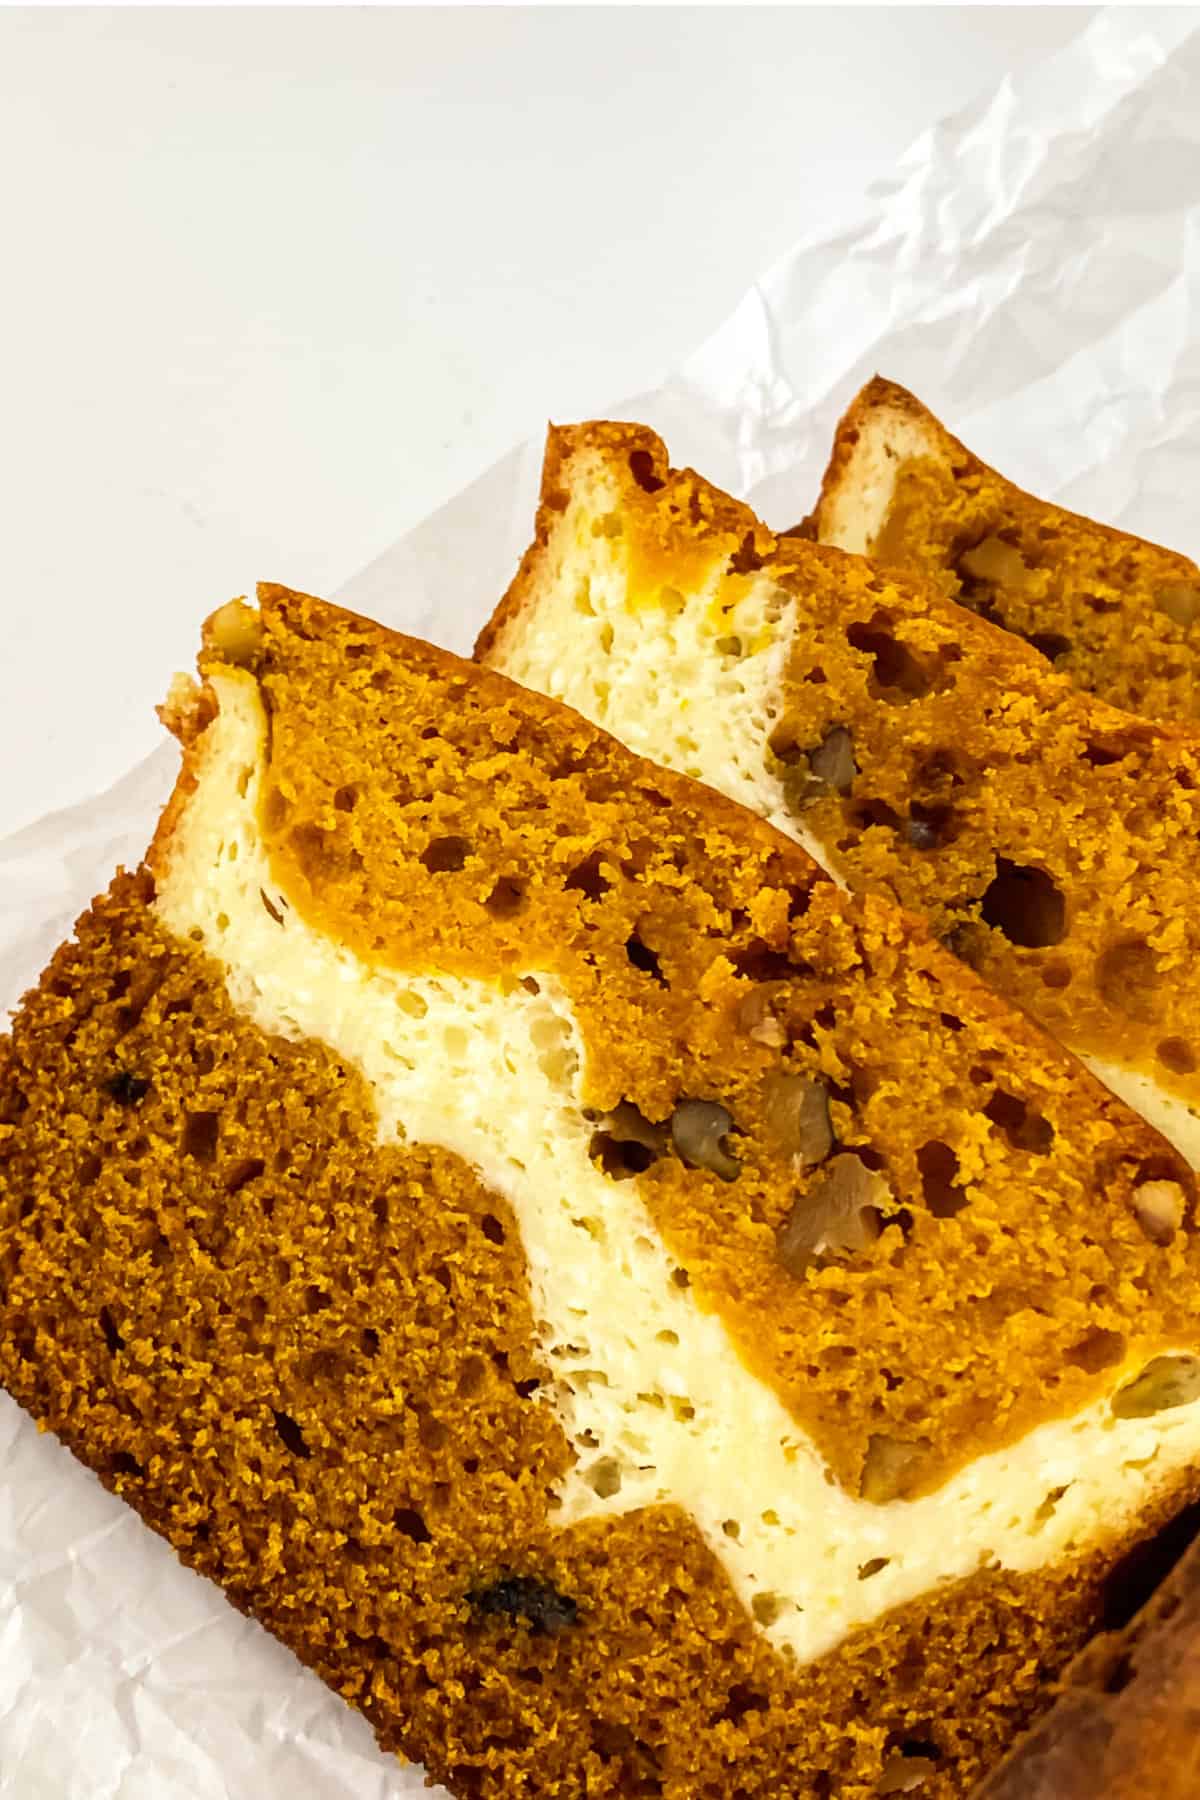 Slices of pumpkin bread with cream cheese filling.